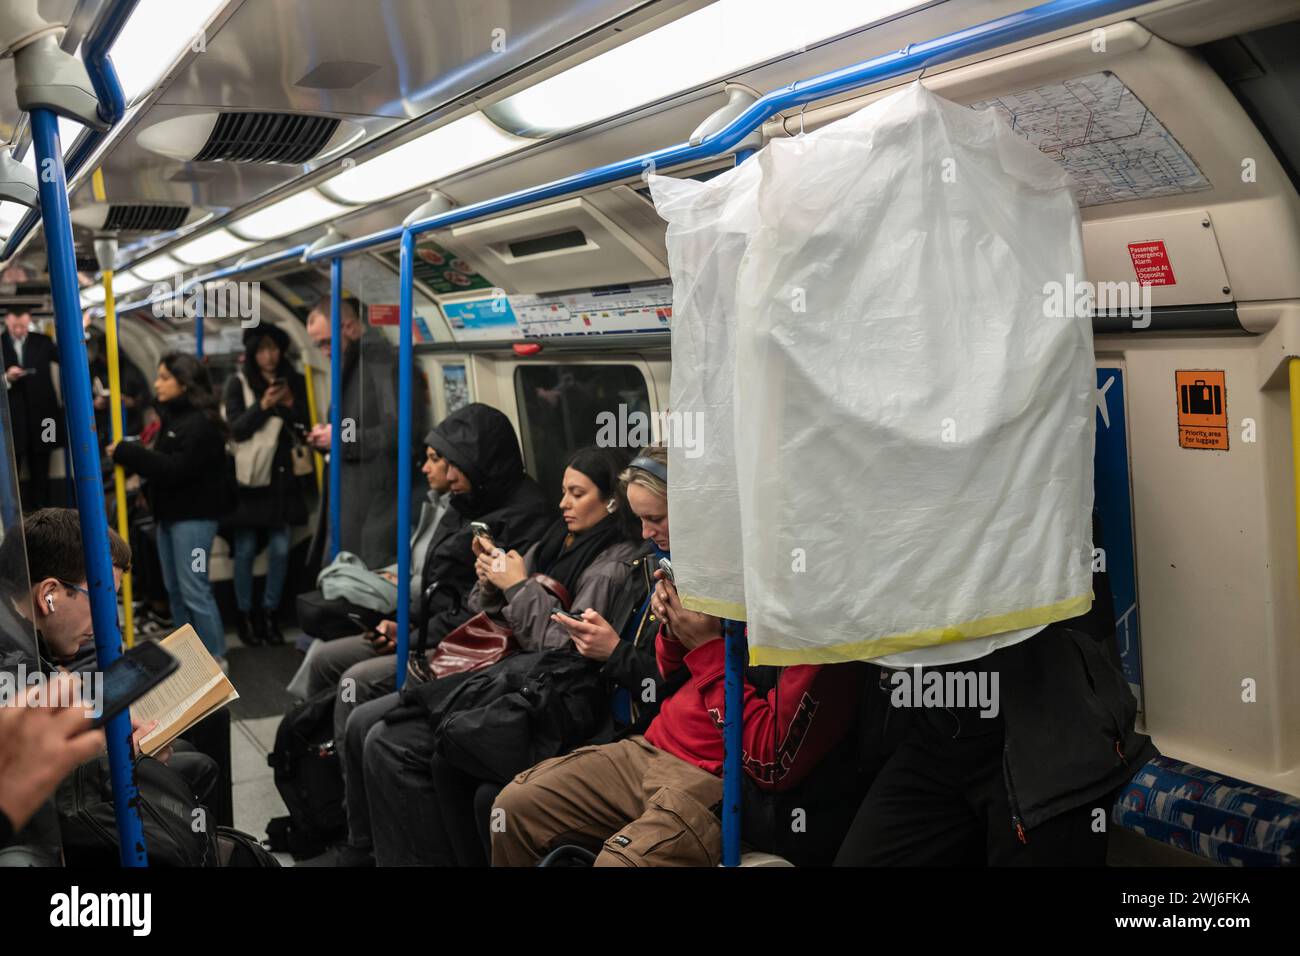 A commuter hangs their dry cleaning up inside the London Underground carriage as they travel into work, City of London, England, United Kingdom Stock Photo